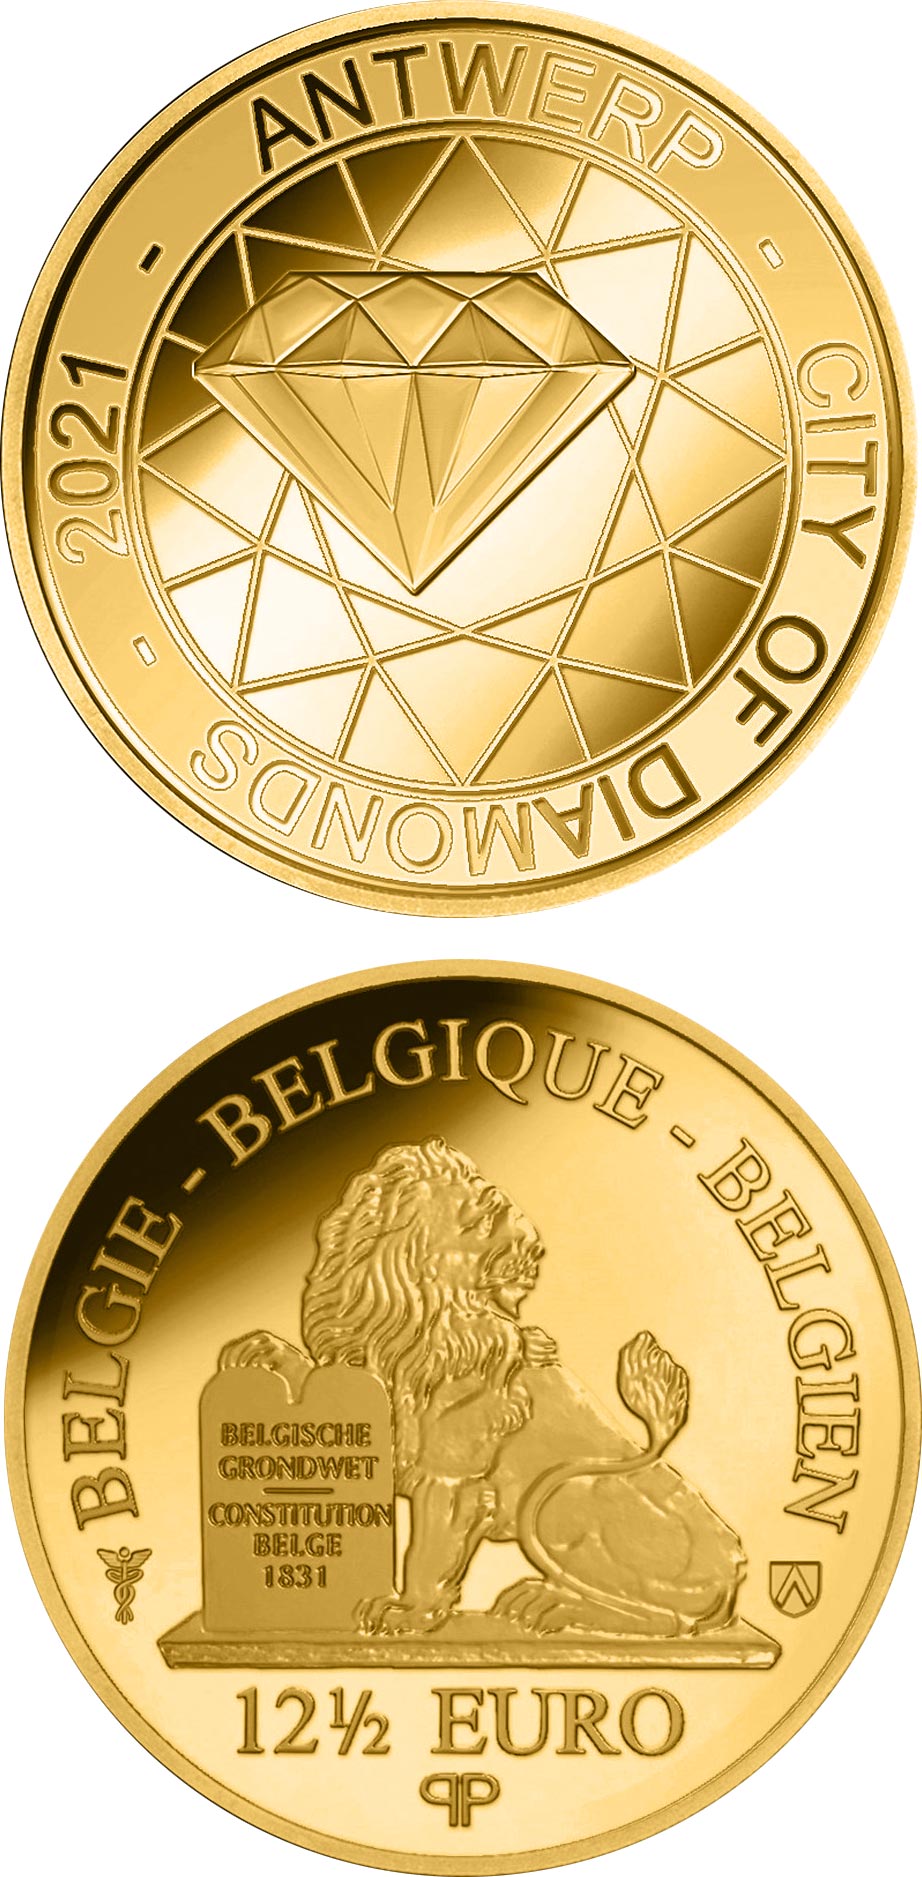 Image of 12.5 euro coin - Antwerp Diamond City | Belgium 2021.  The Gold coin is of Proof quality.